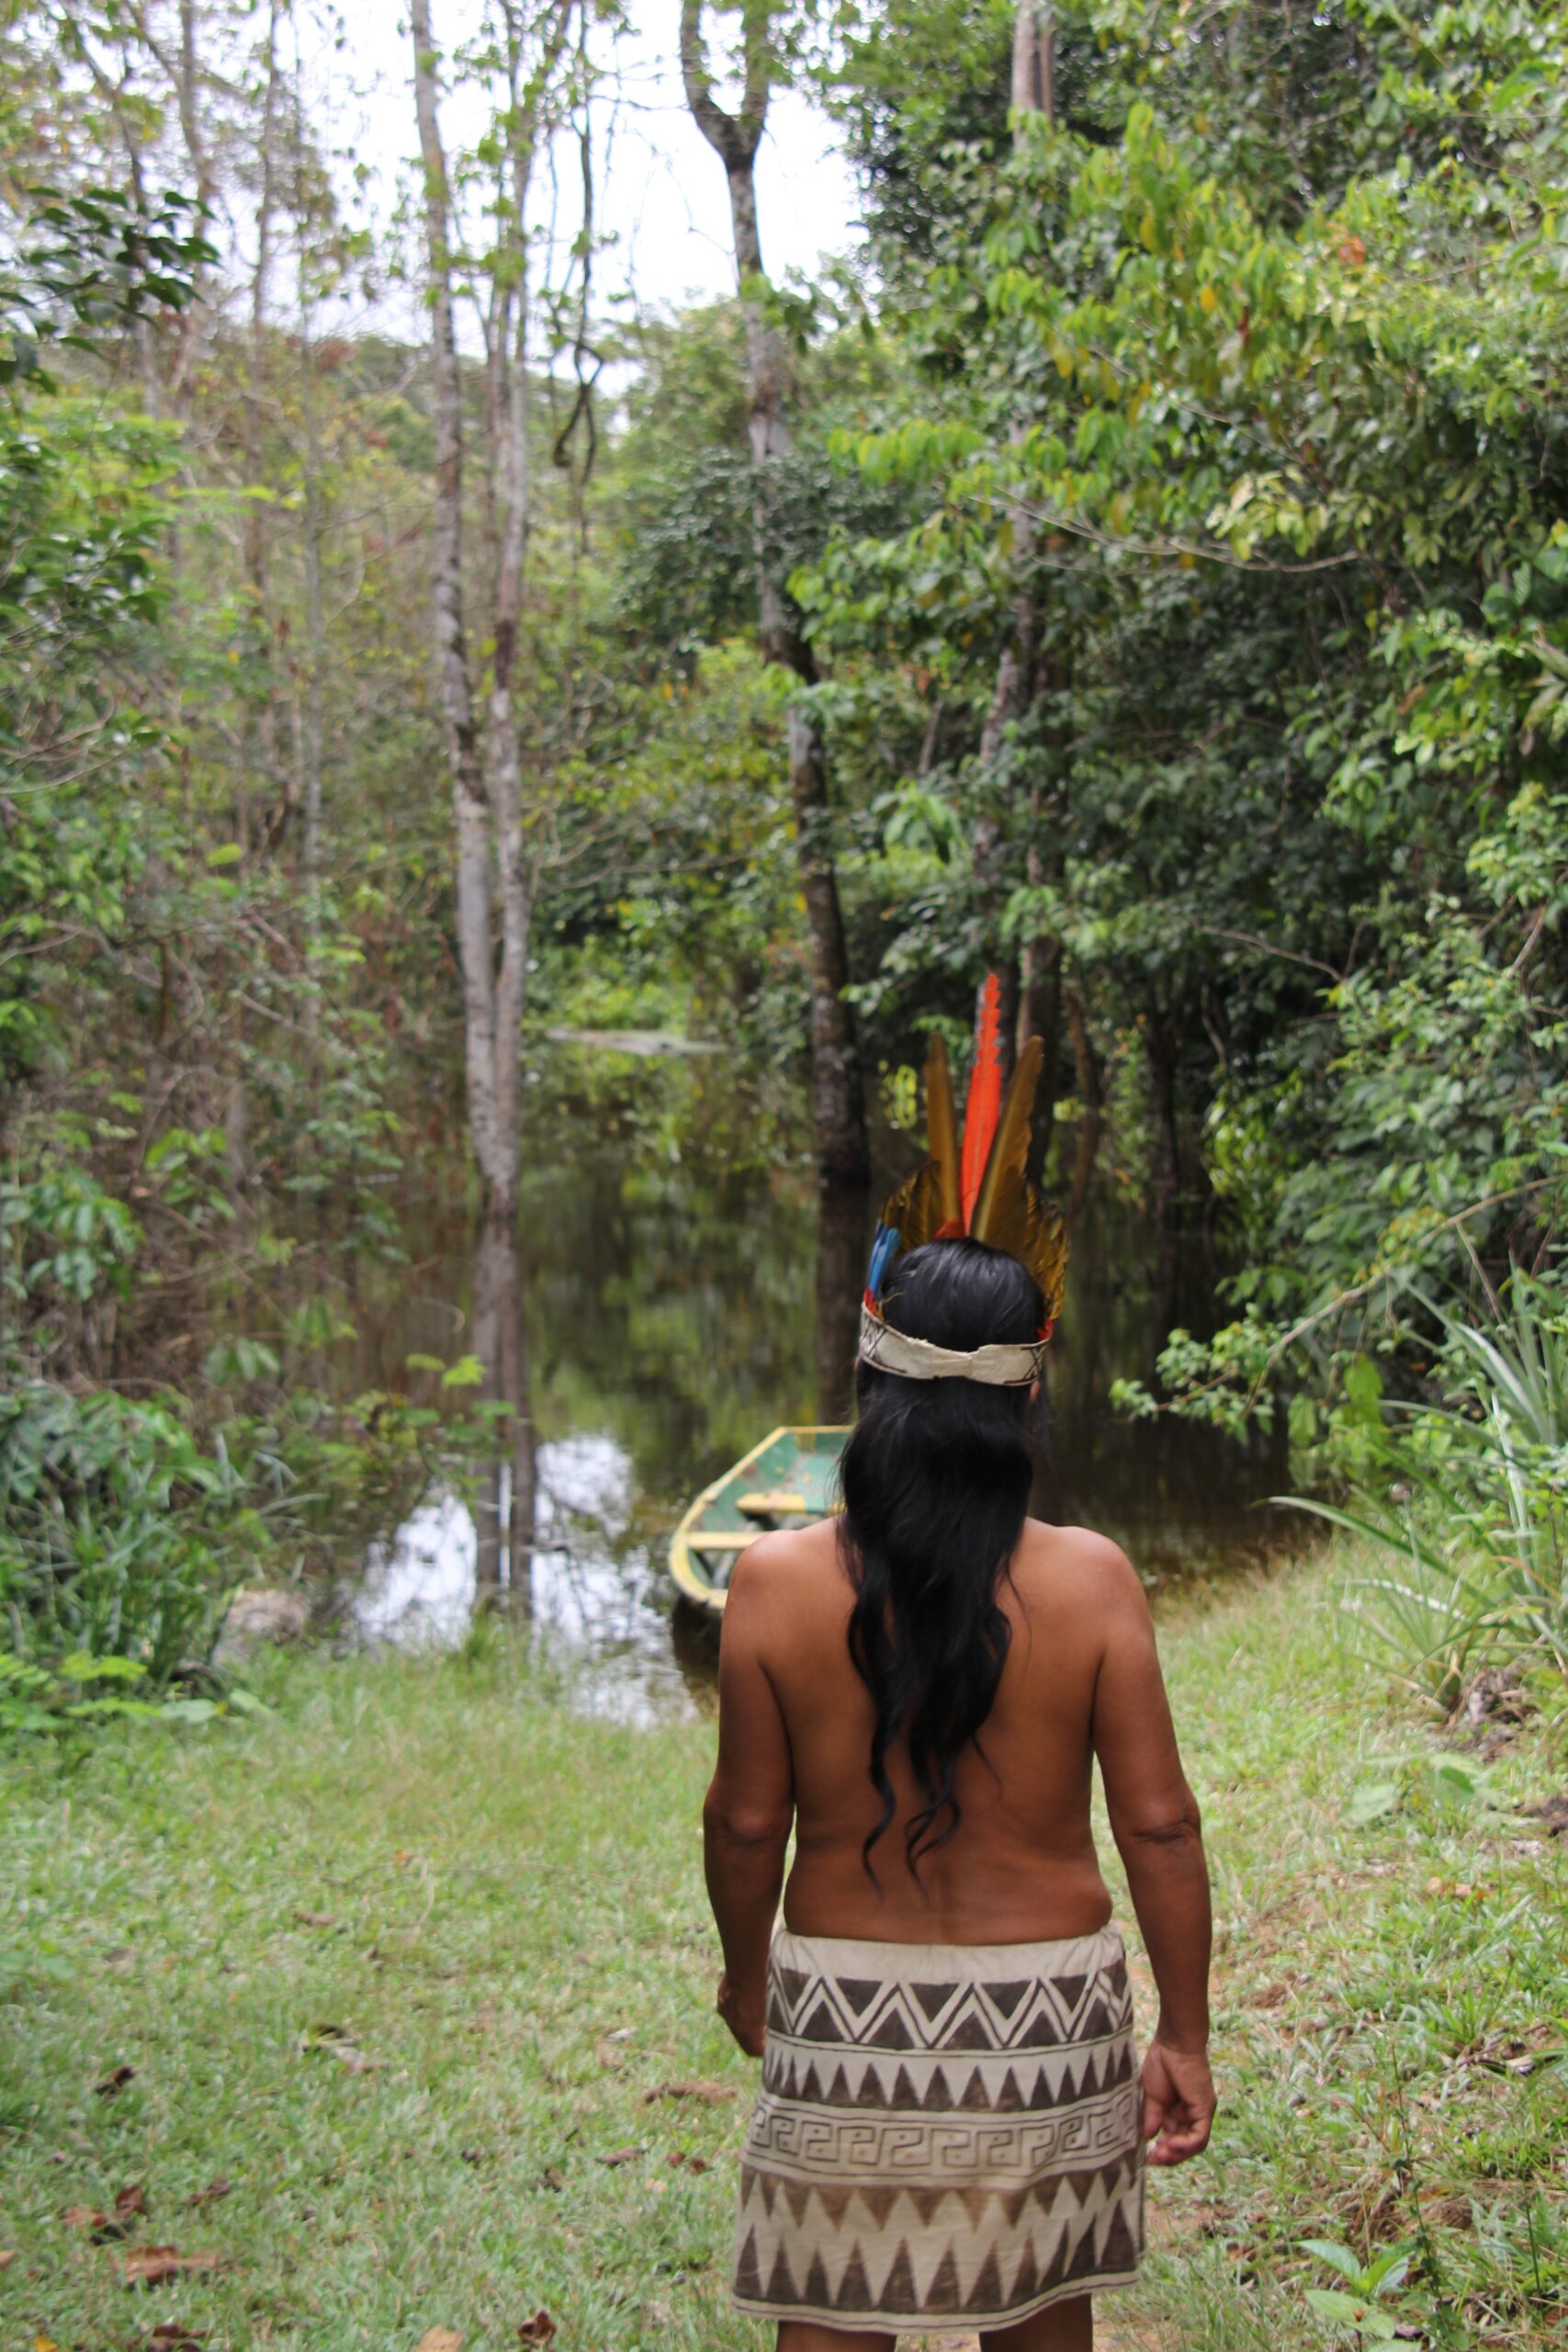 A native man in a forest.